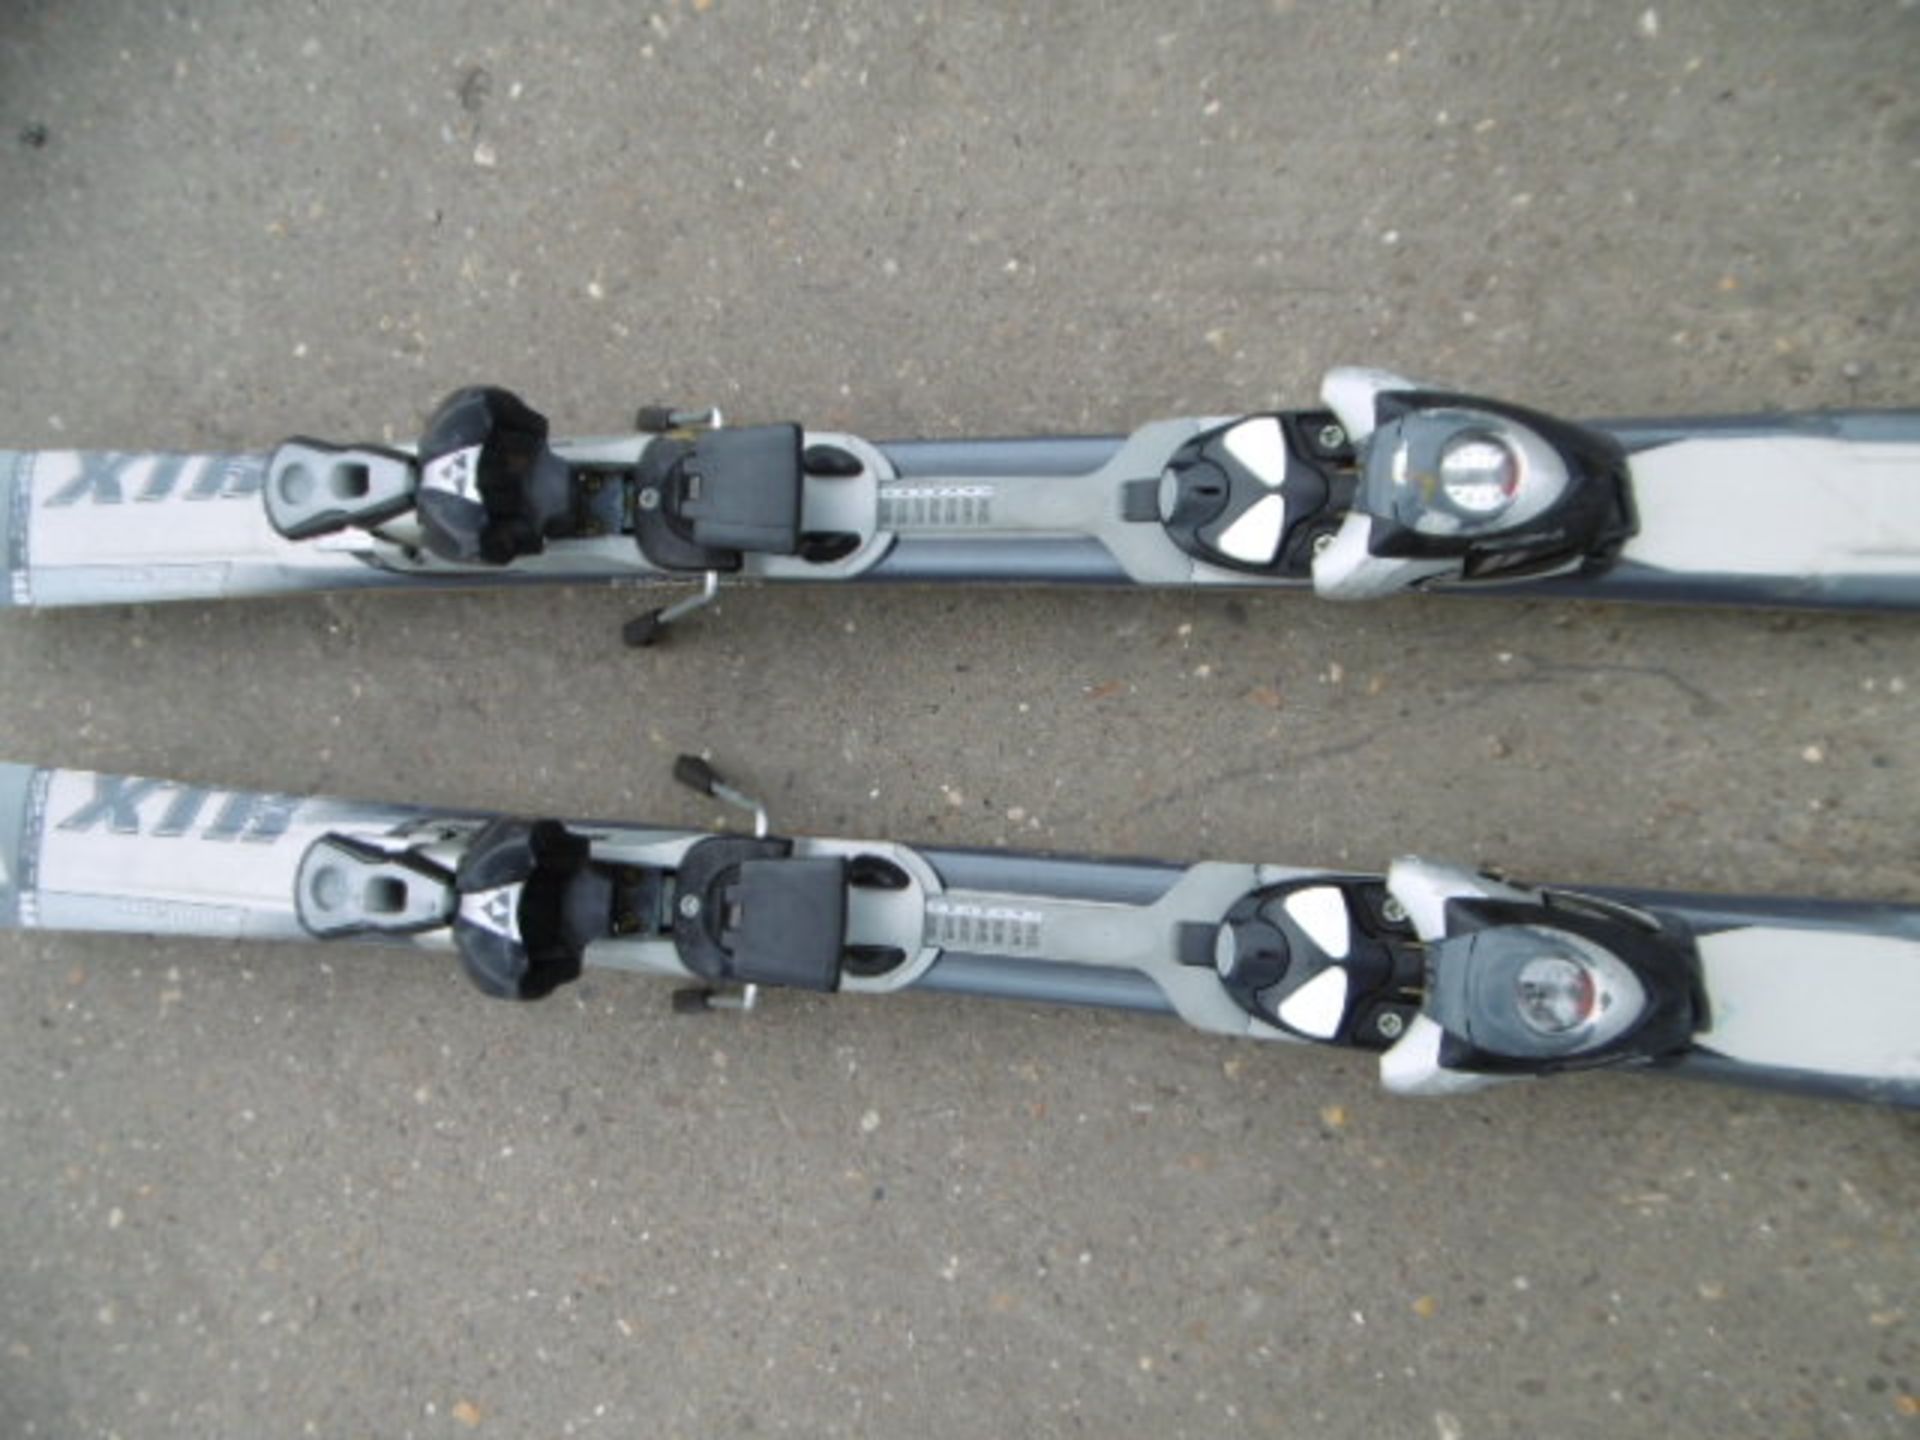 Fischer Carve Pro 148 Skis - Image 3 of 7